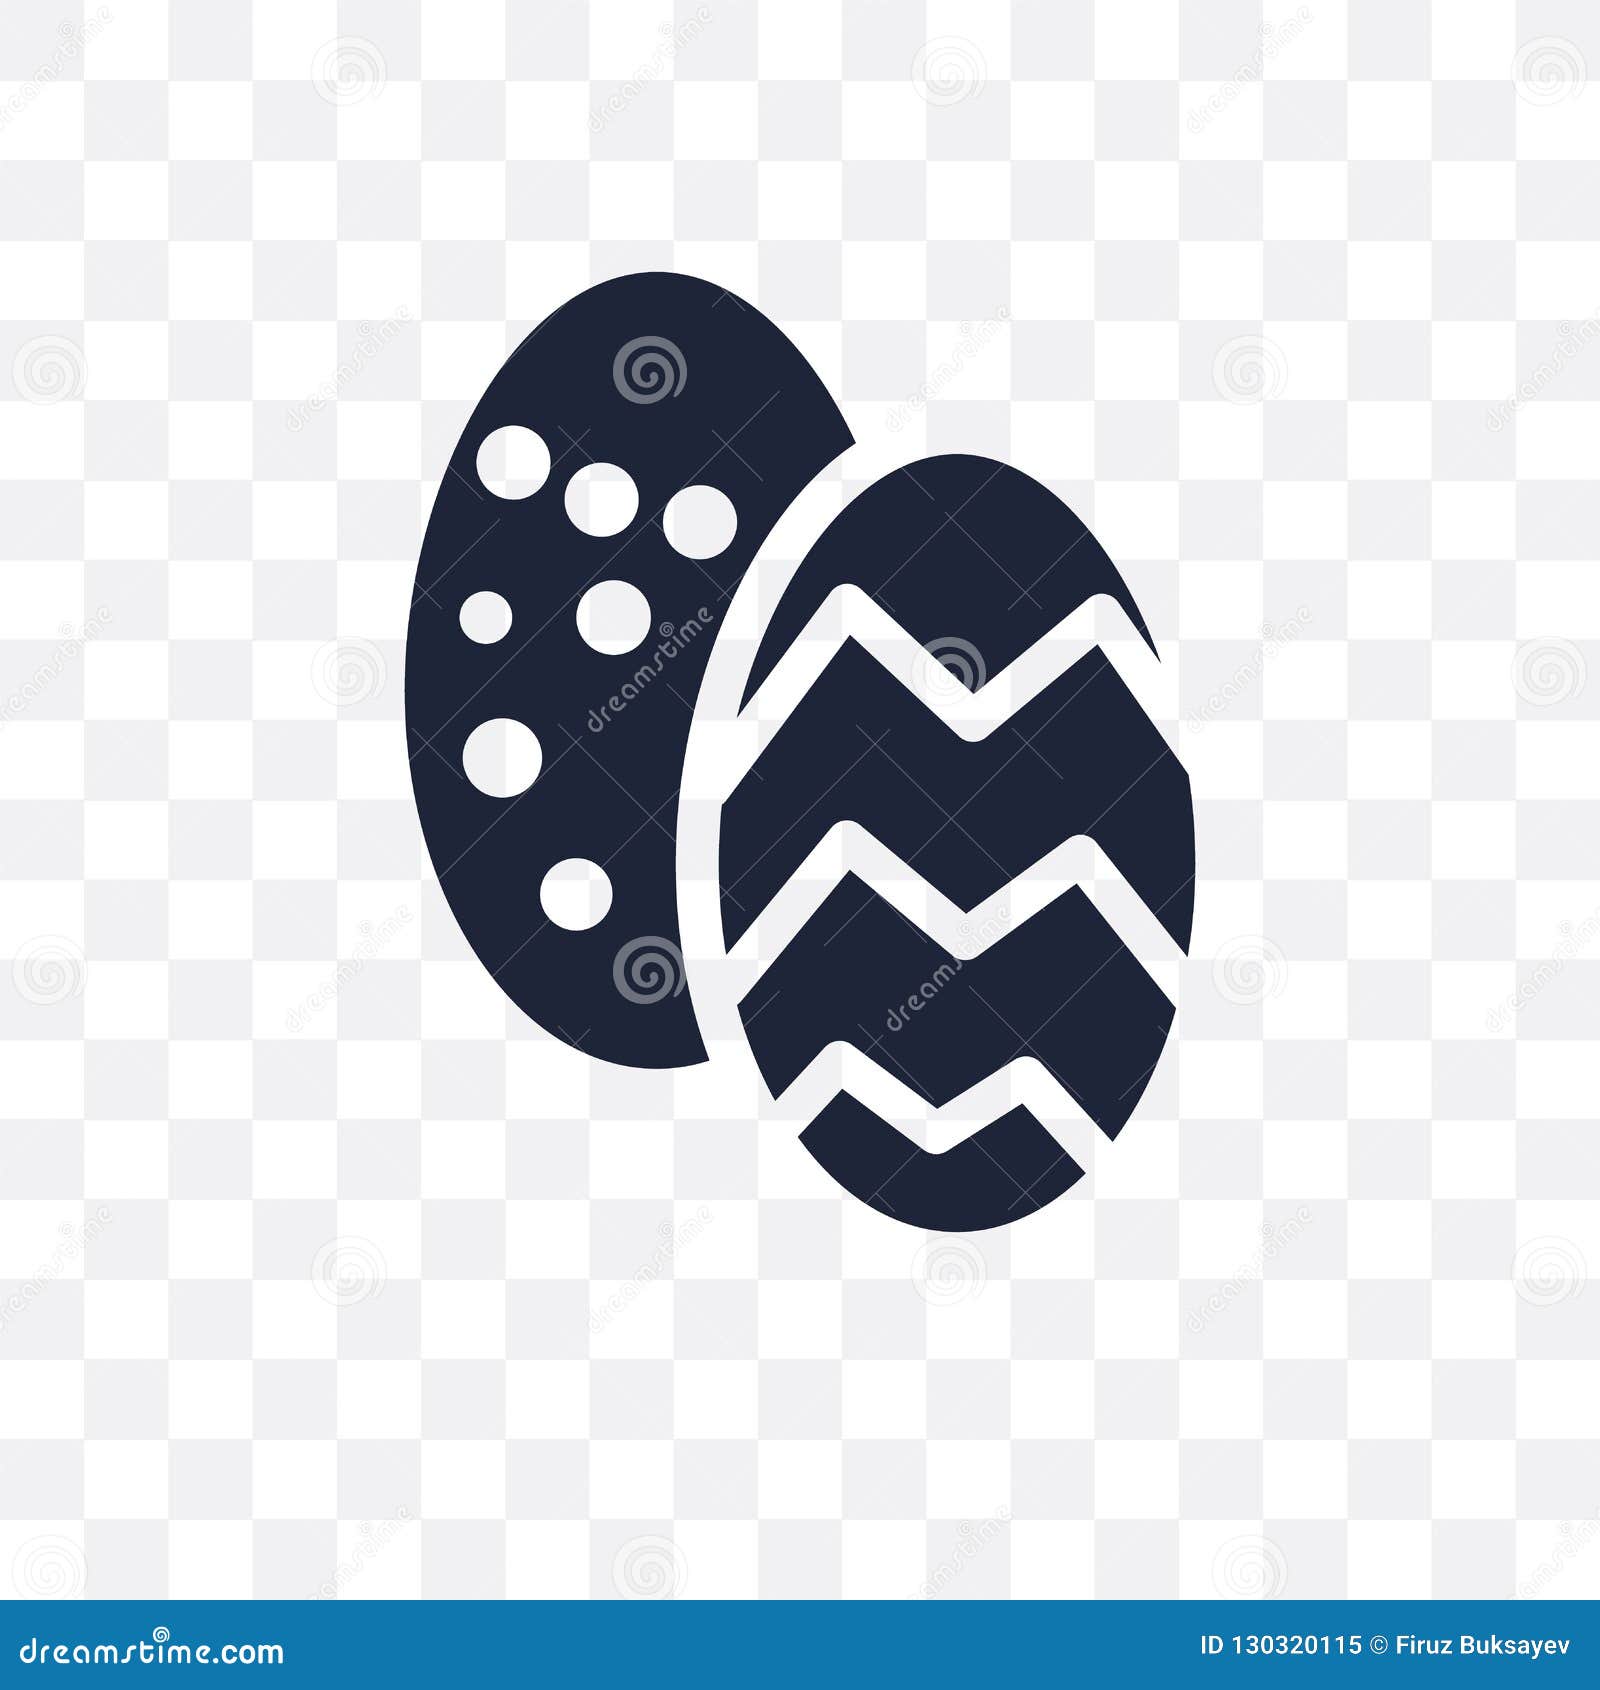 Golden easter eggs isolated on transparent background PNG - Similar PNG